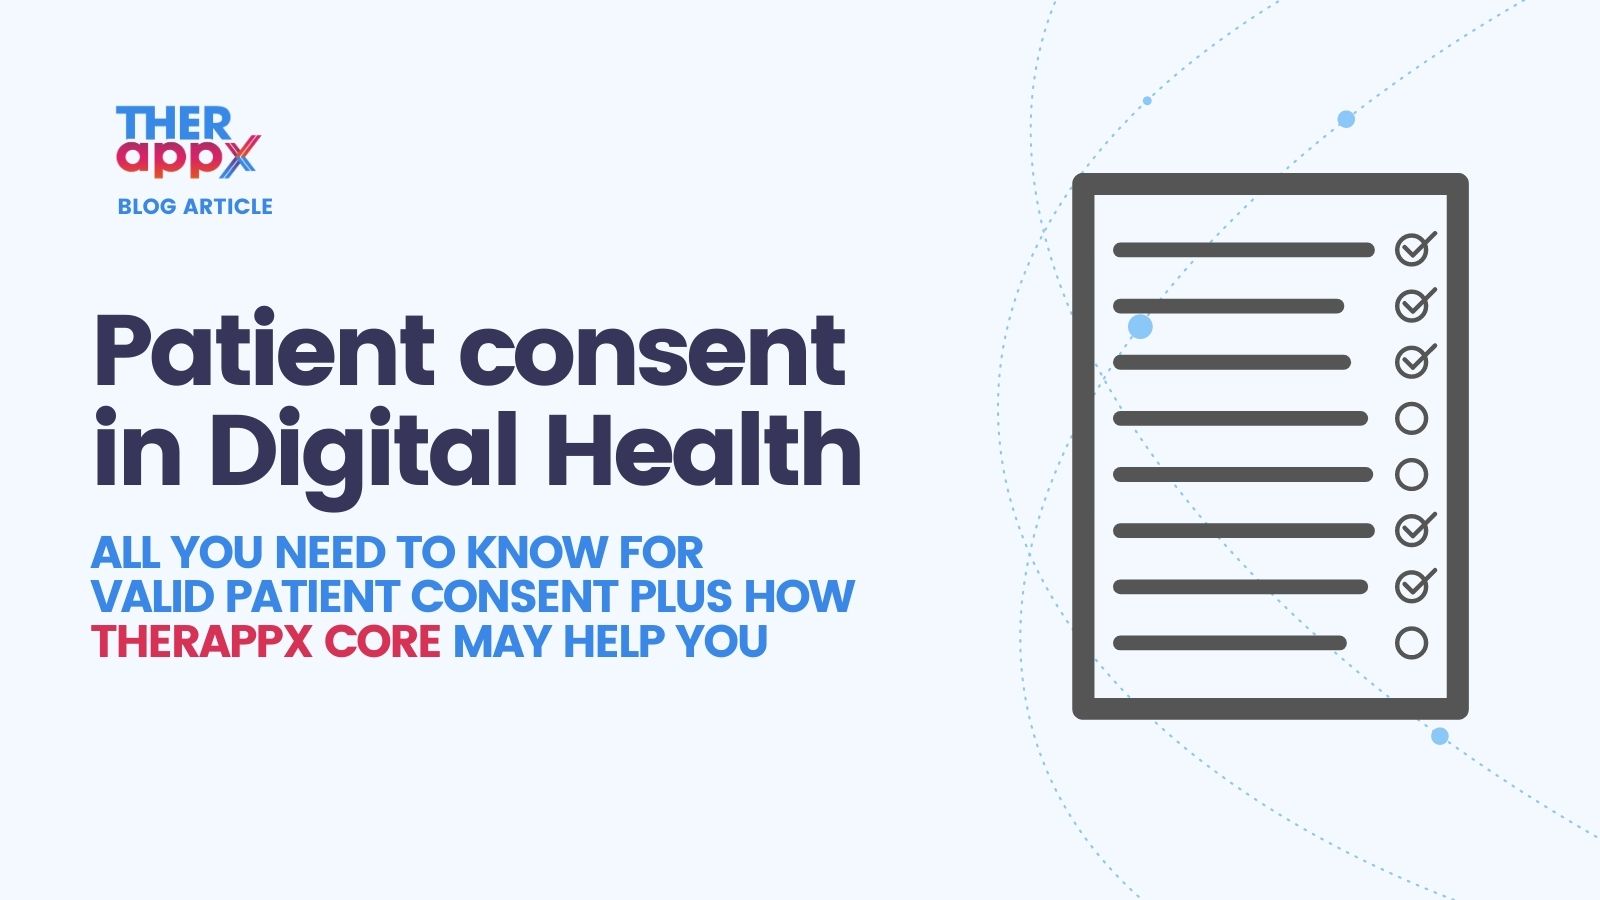 How to obtain valid consent from patients when using Digital Health Tools